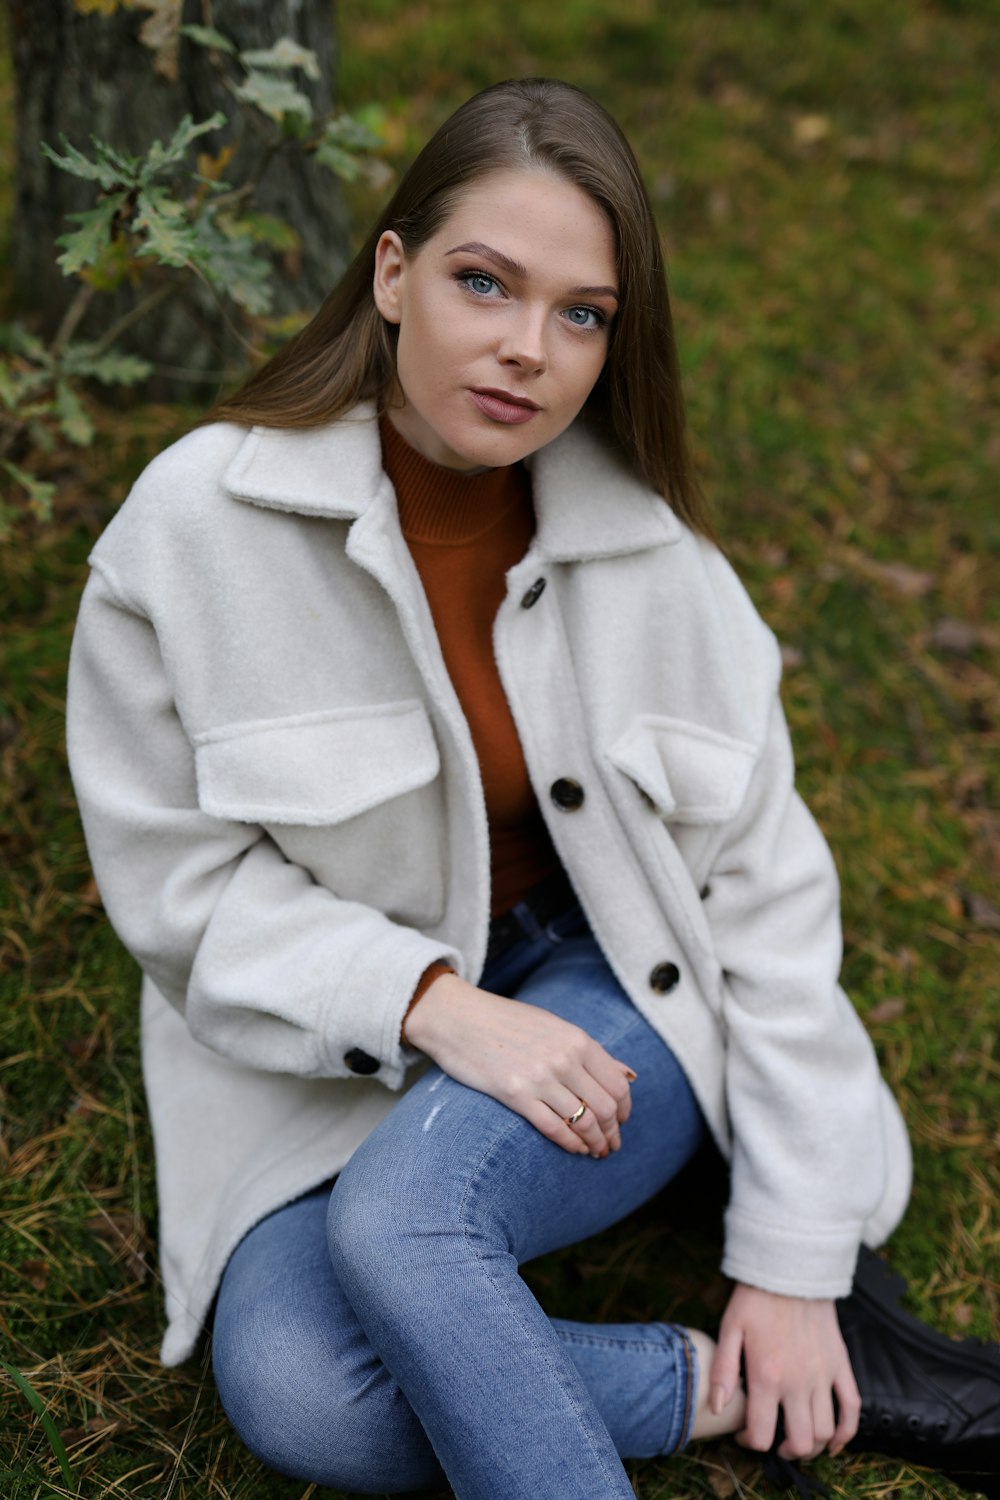 woman in white coat and blue denim jeans sitting on green grass during daytime